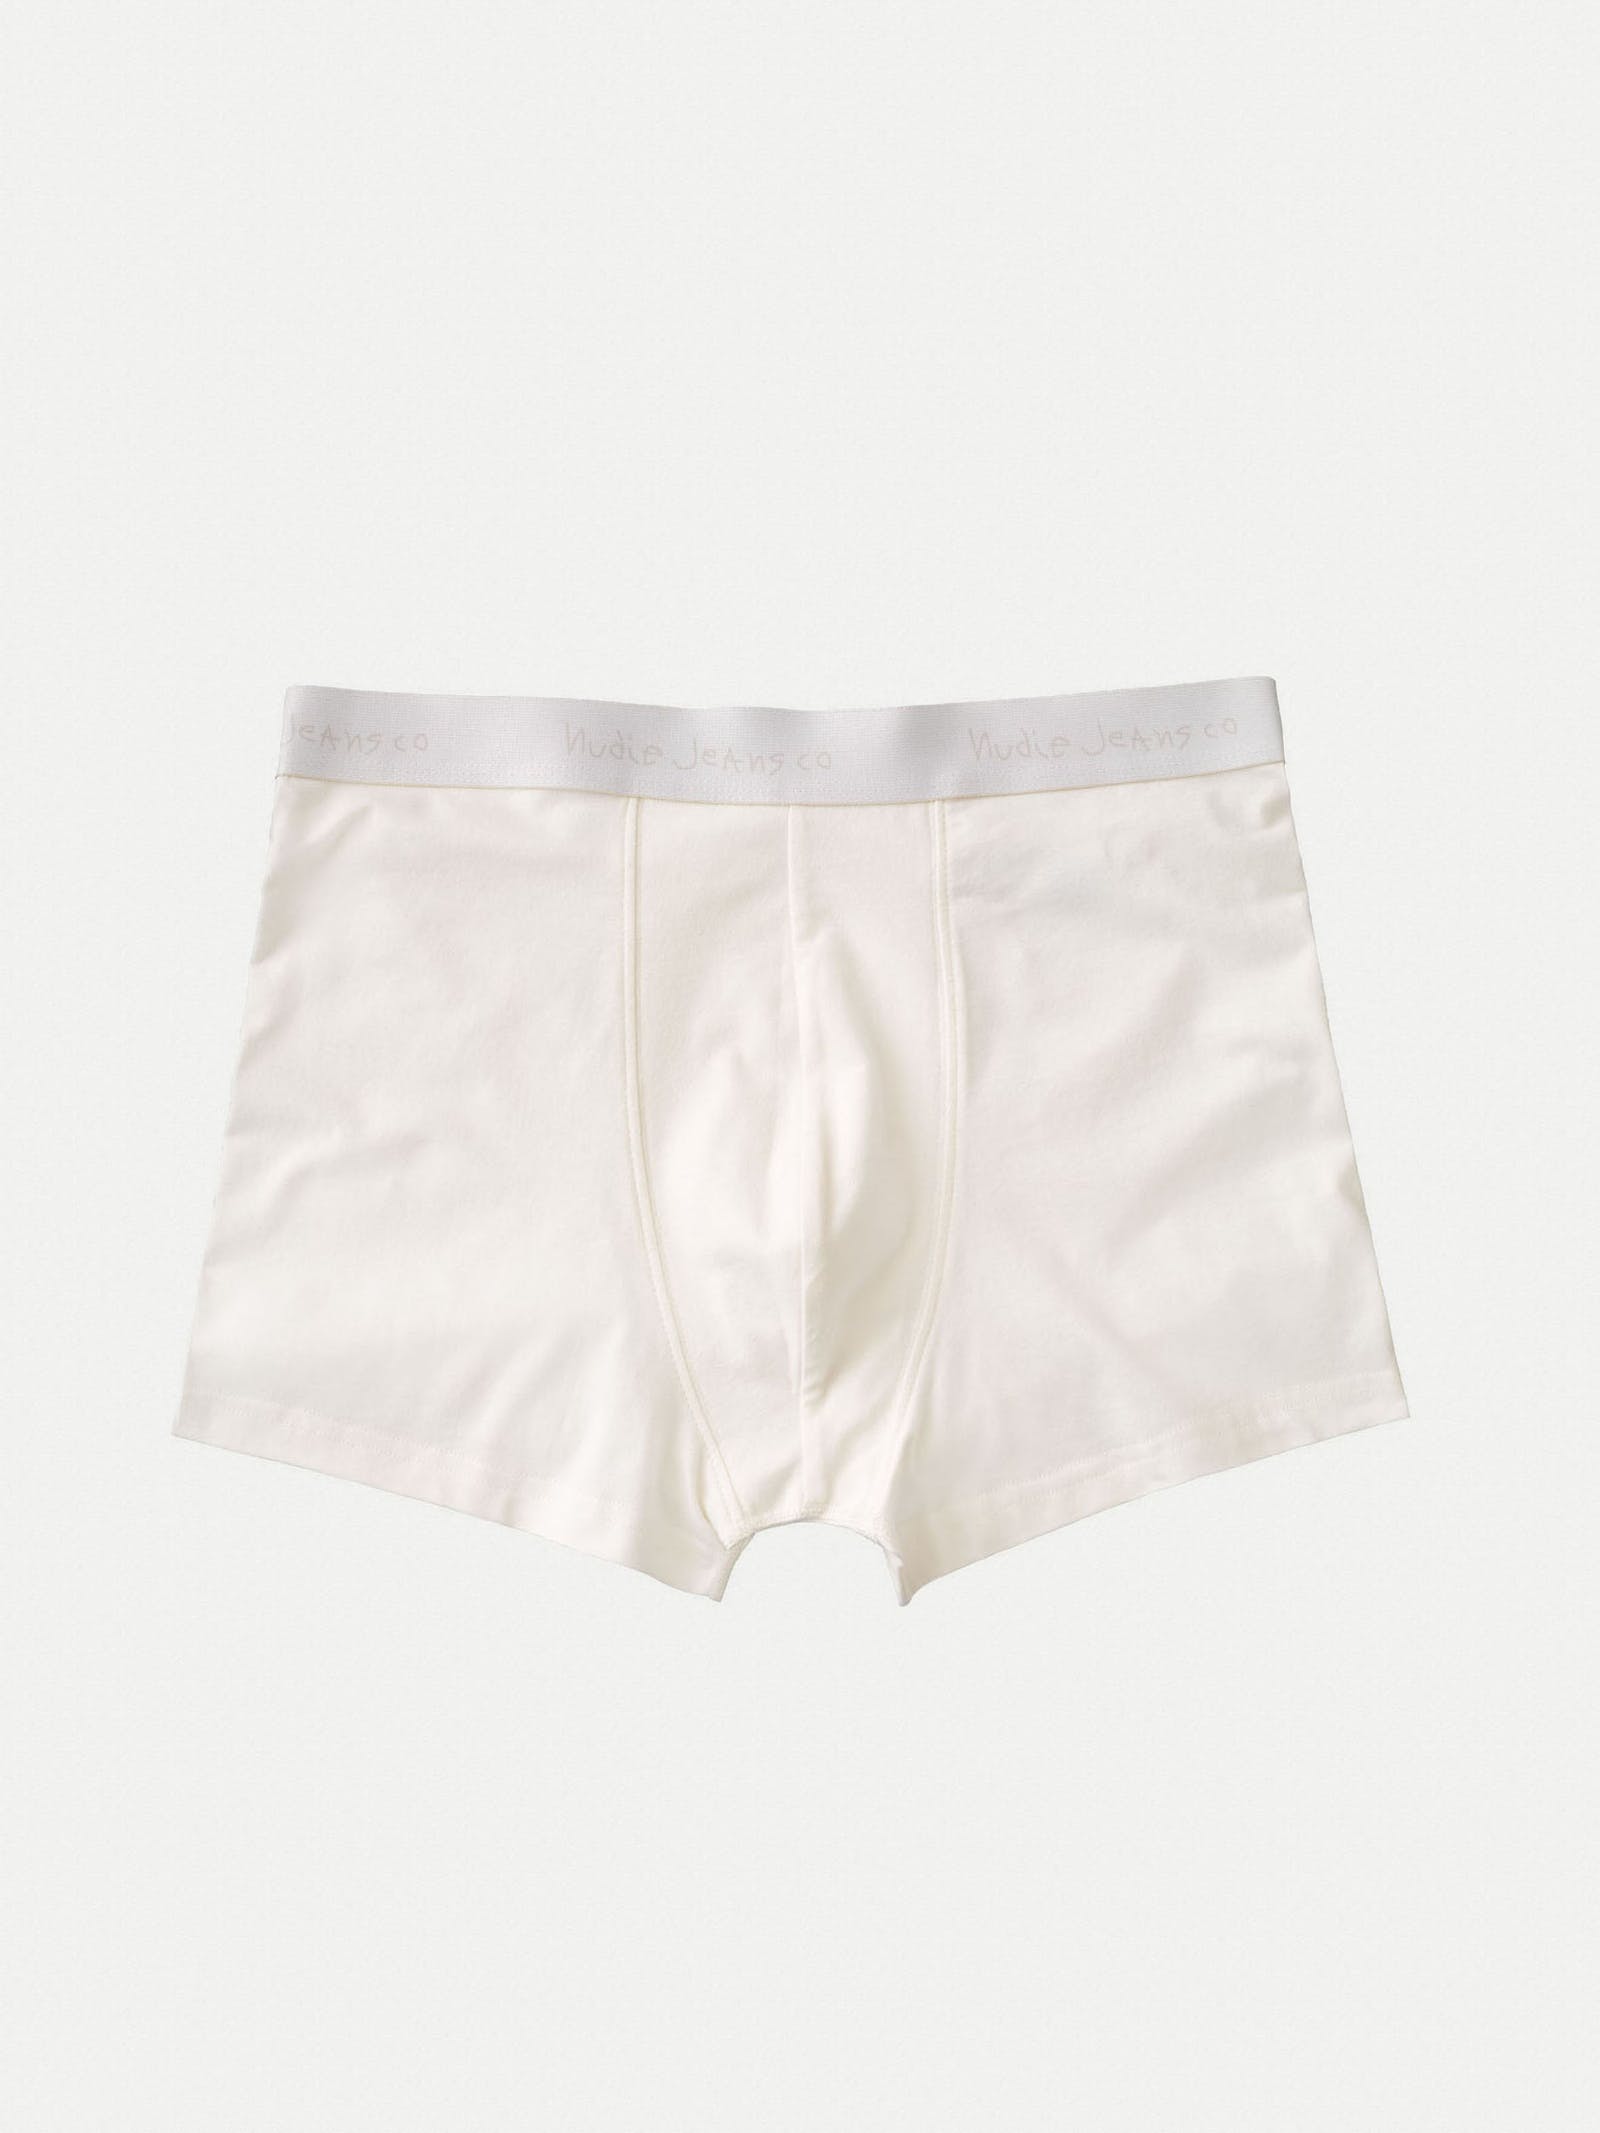 Nudie - Boxer Briefs - Offwhite